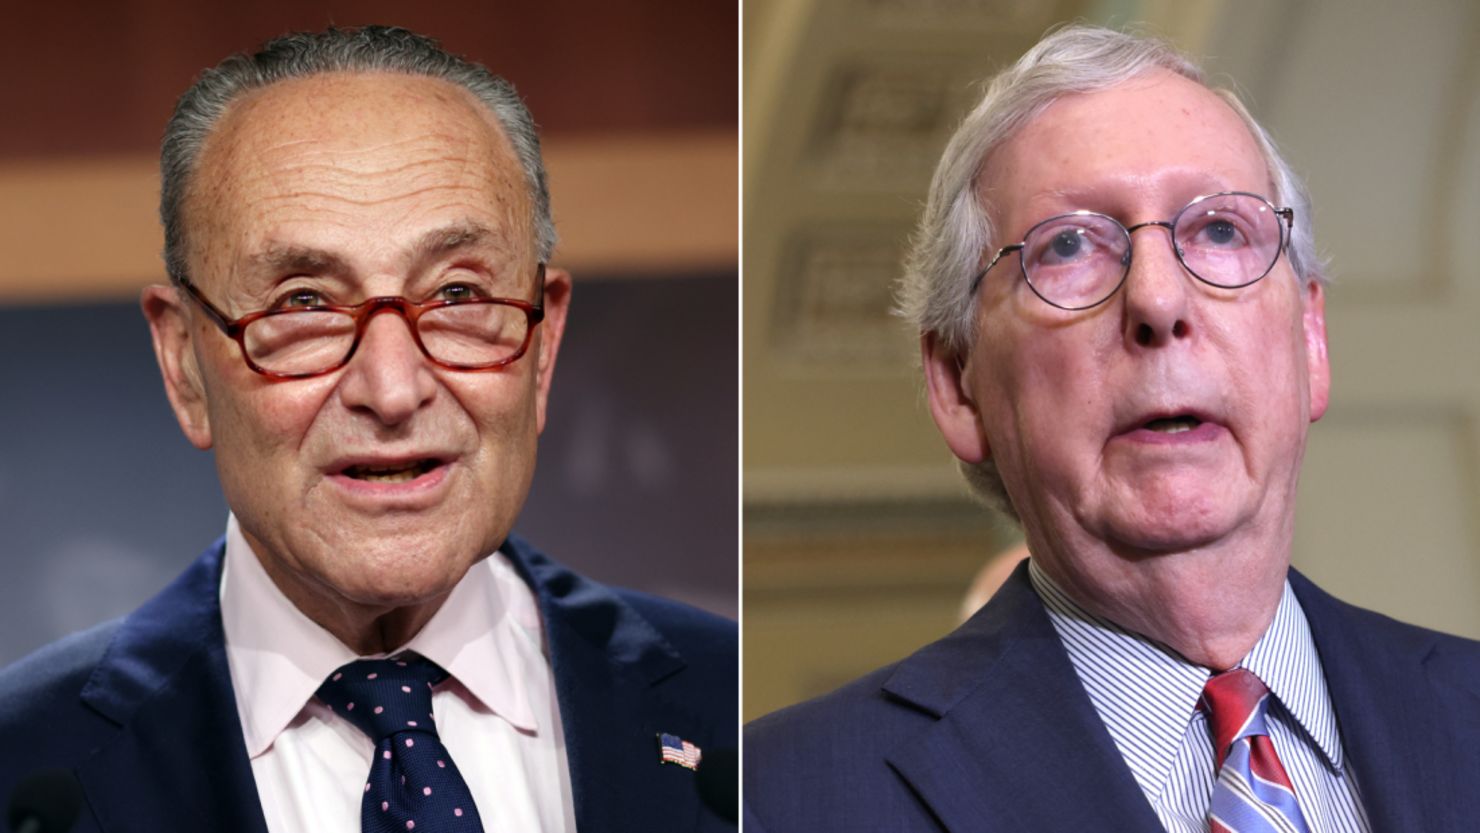 Senate Majority Leader Chuck Schumer, at left, and Senate Minority Leader Mitch McConnell, at right.